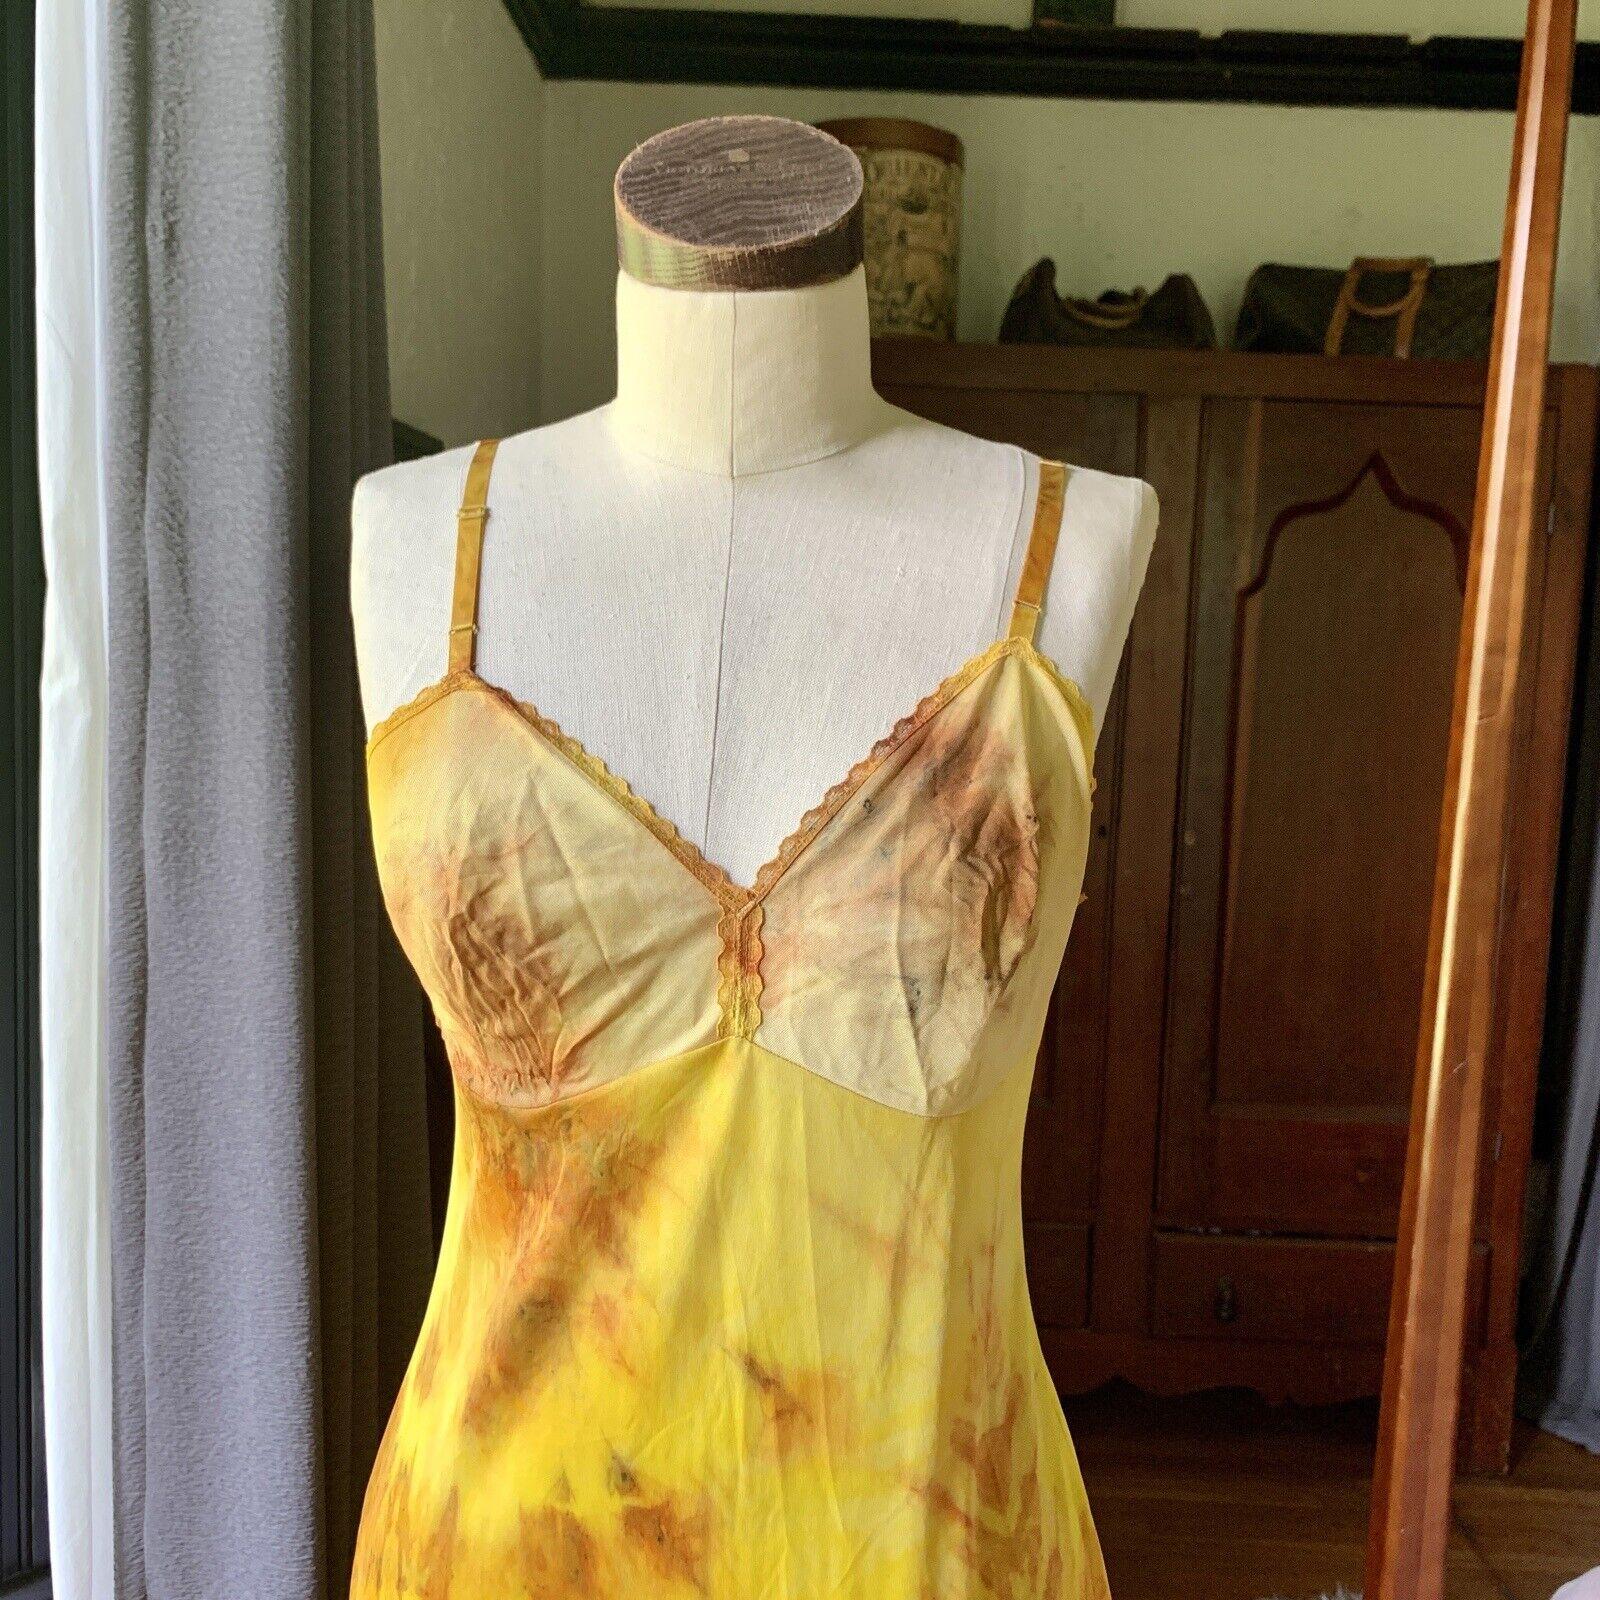 The DYED PETALS Collection (vintage, upcycled, and custom-made fashion using natural dyes and colorants), is designed and offered exclusively by PARPARIAN.

Hand-dyed with Rose Buds and Turmeric
Vintage Brand: Vanity Fair (Older 40's/50's